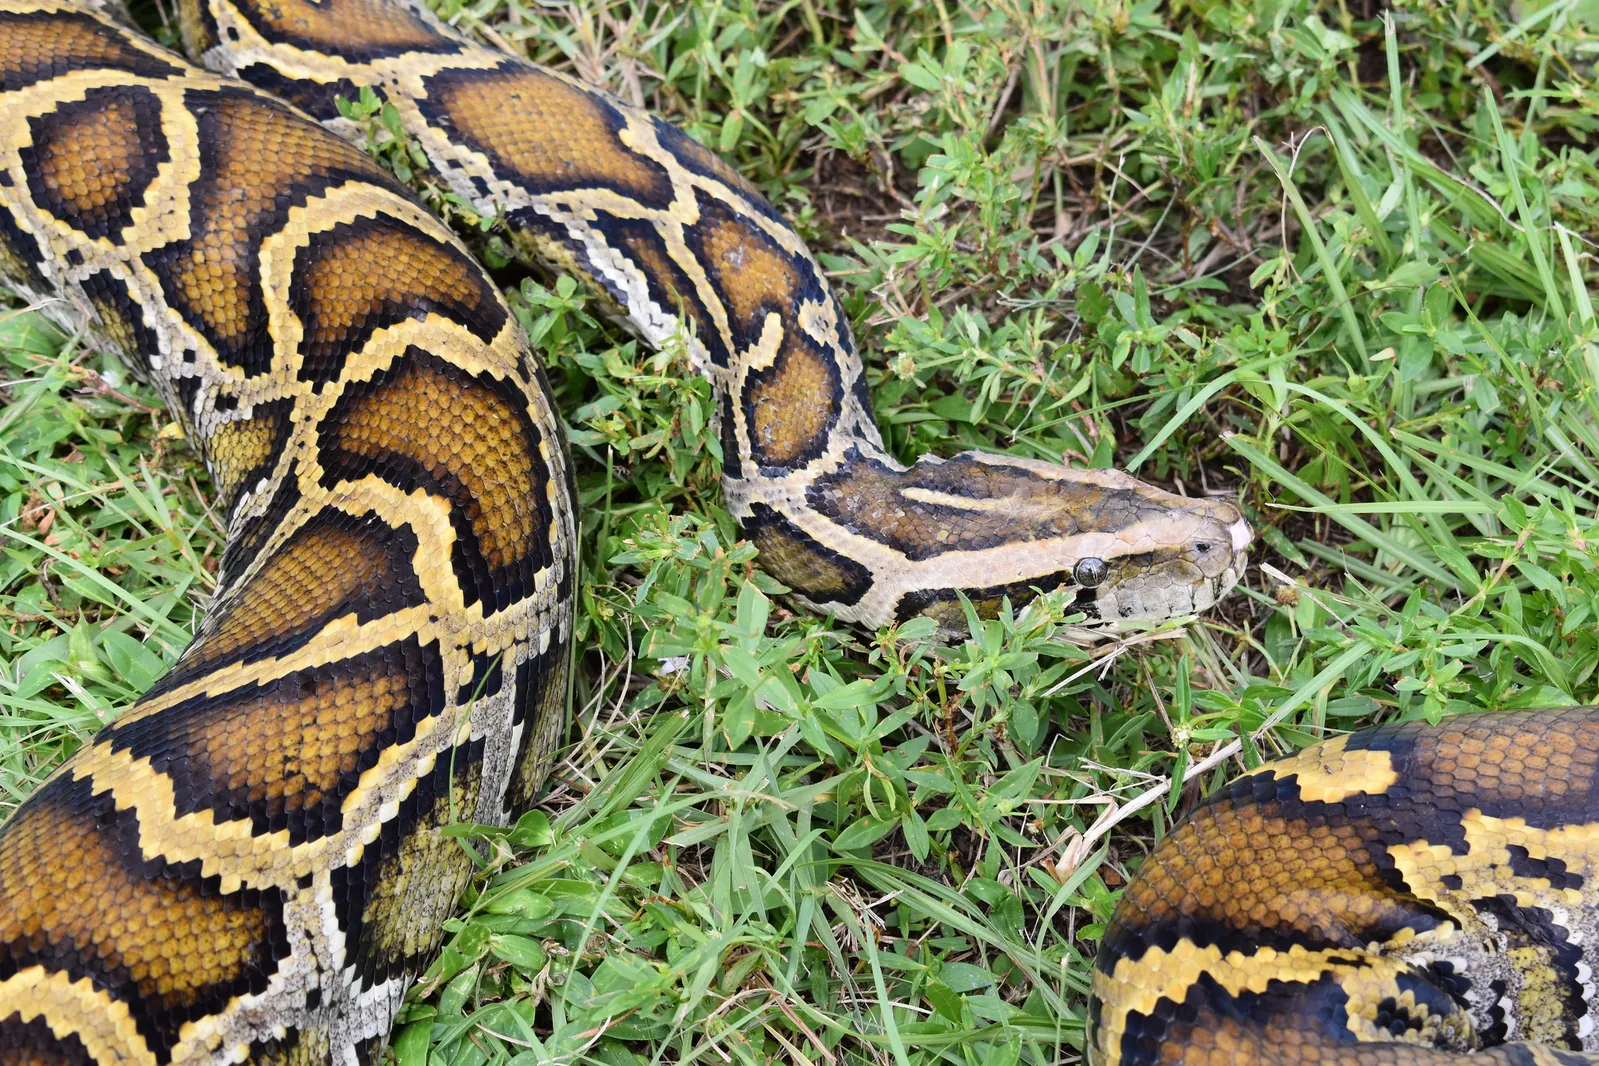 Python Meat Could Be a Sustainable, Nutritious Food Source, Scientists Say